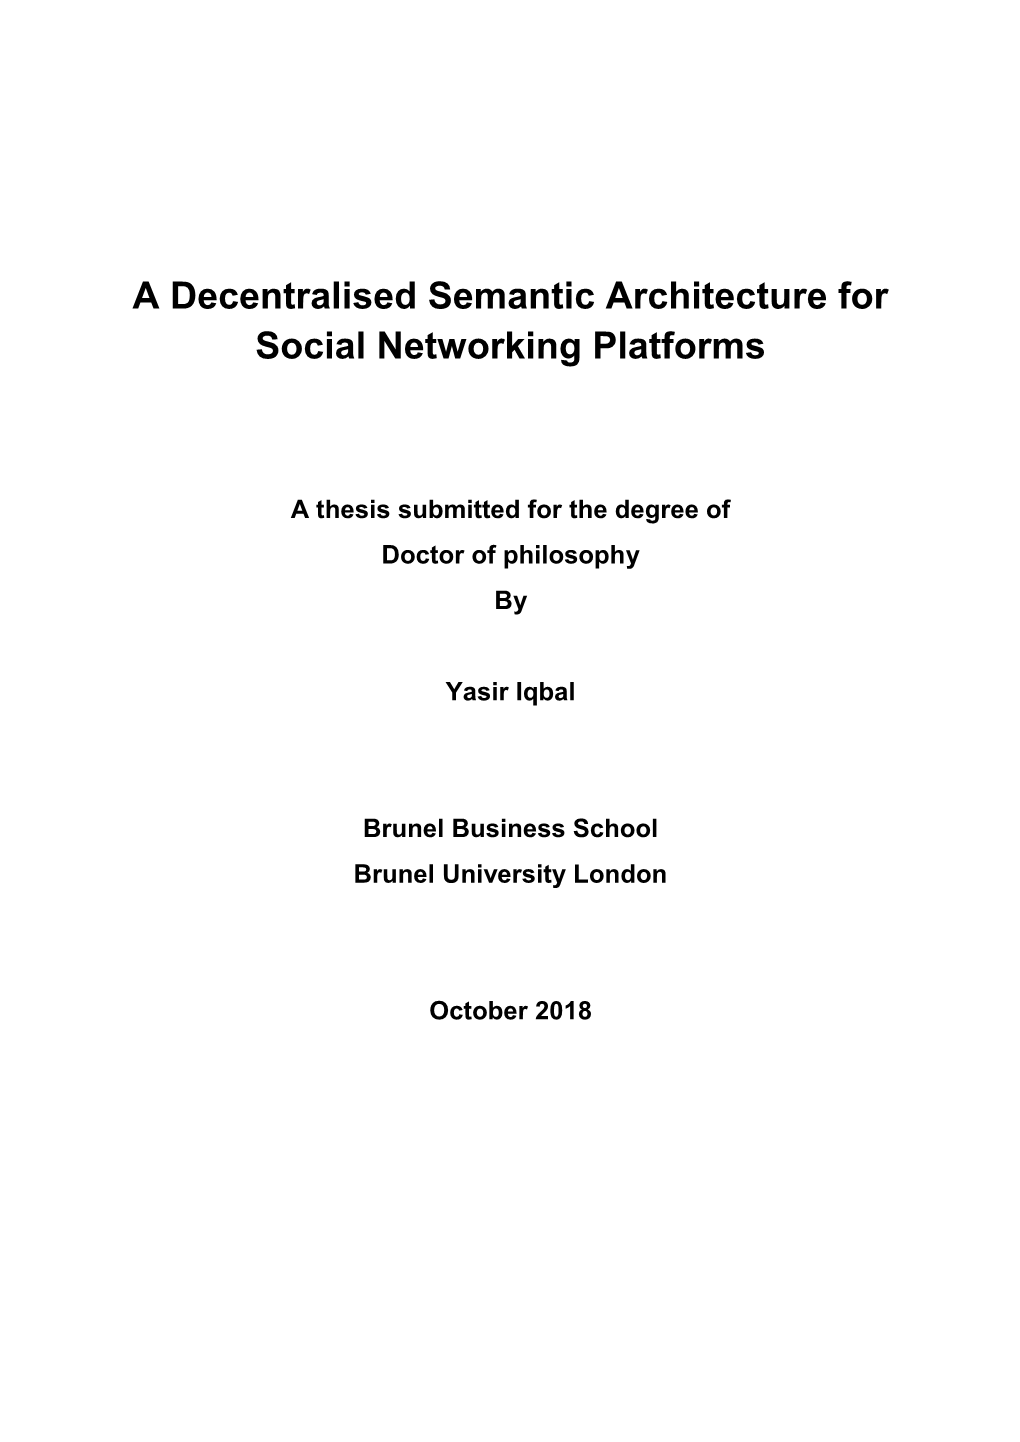 A Decentralised Semantic Architecture for Social Networking Platforms